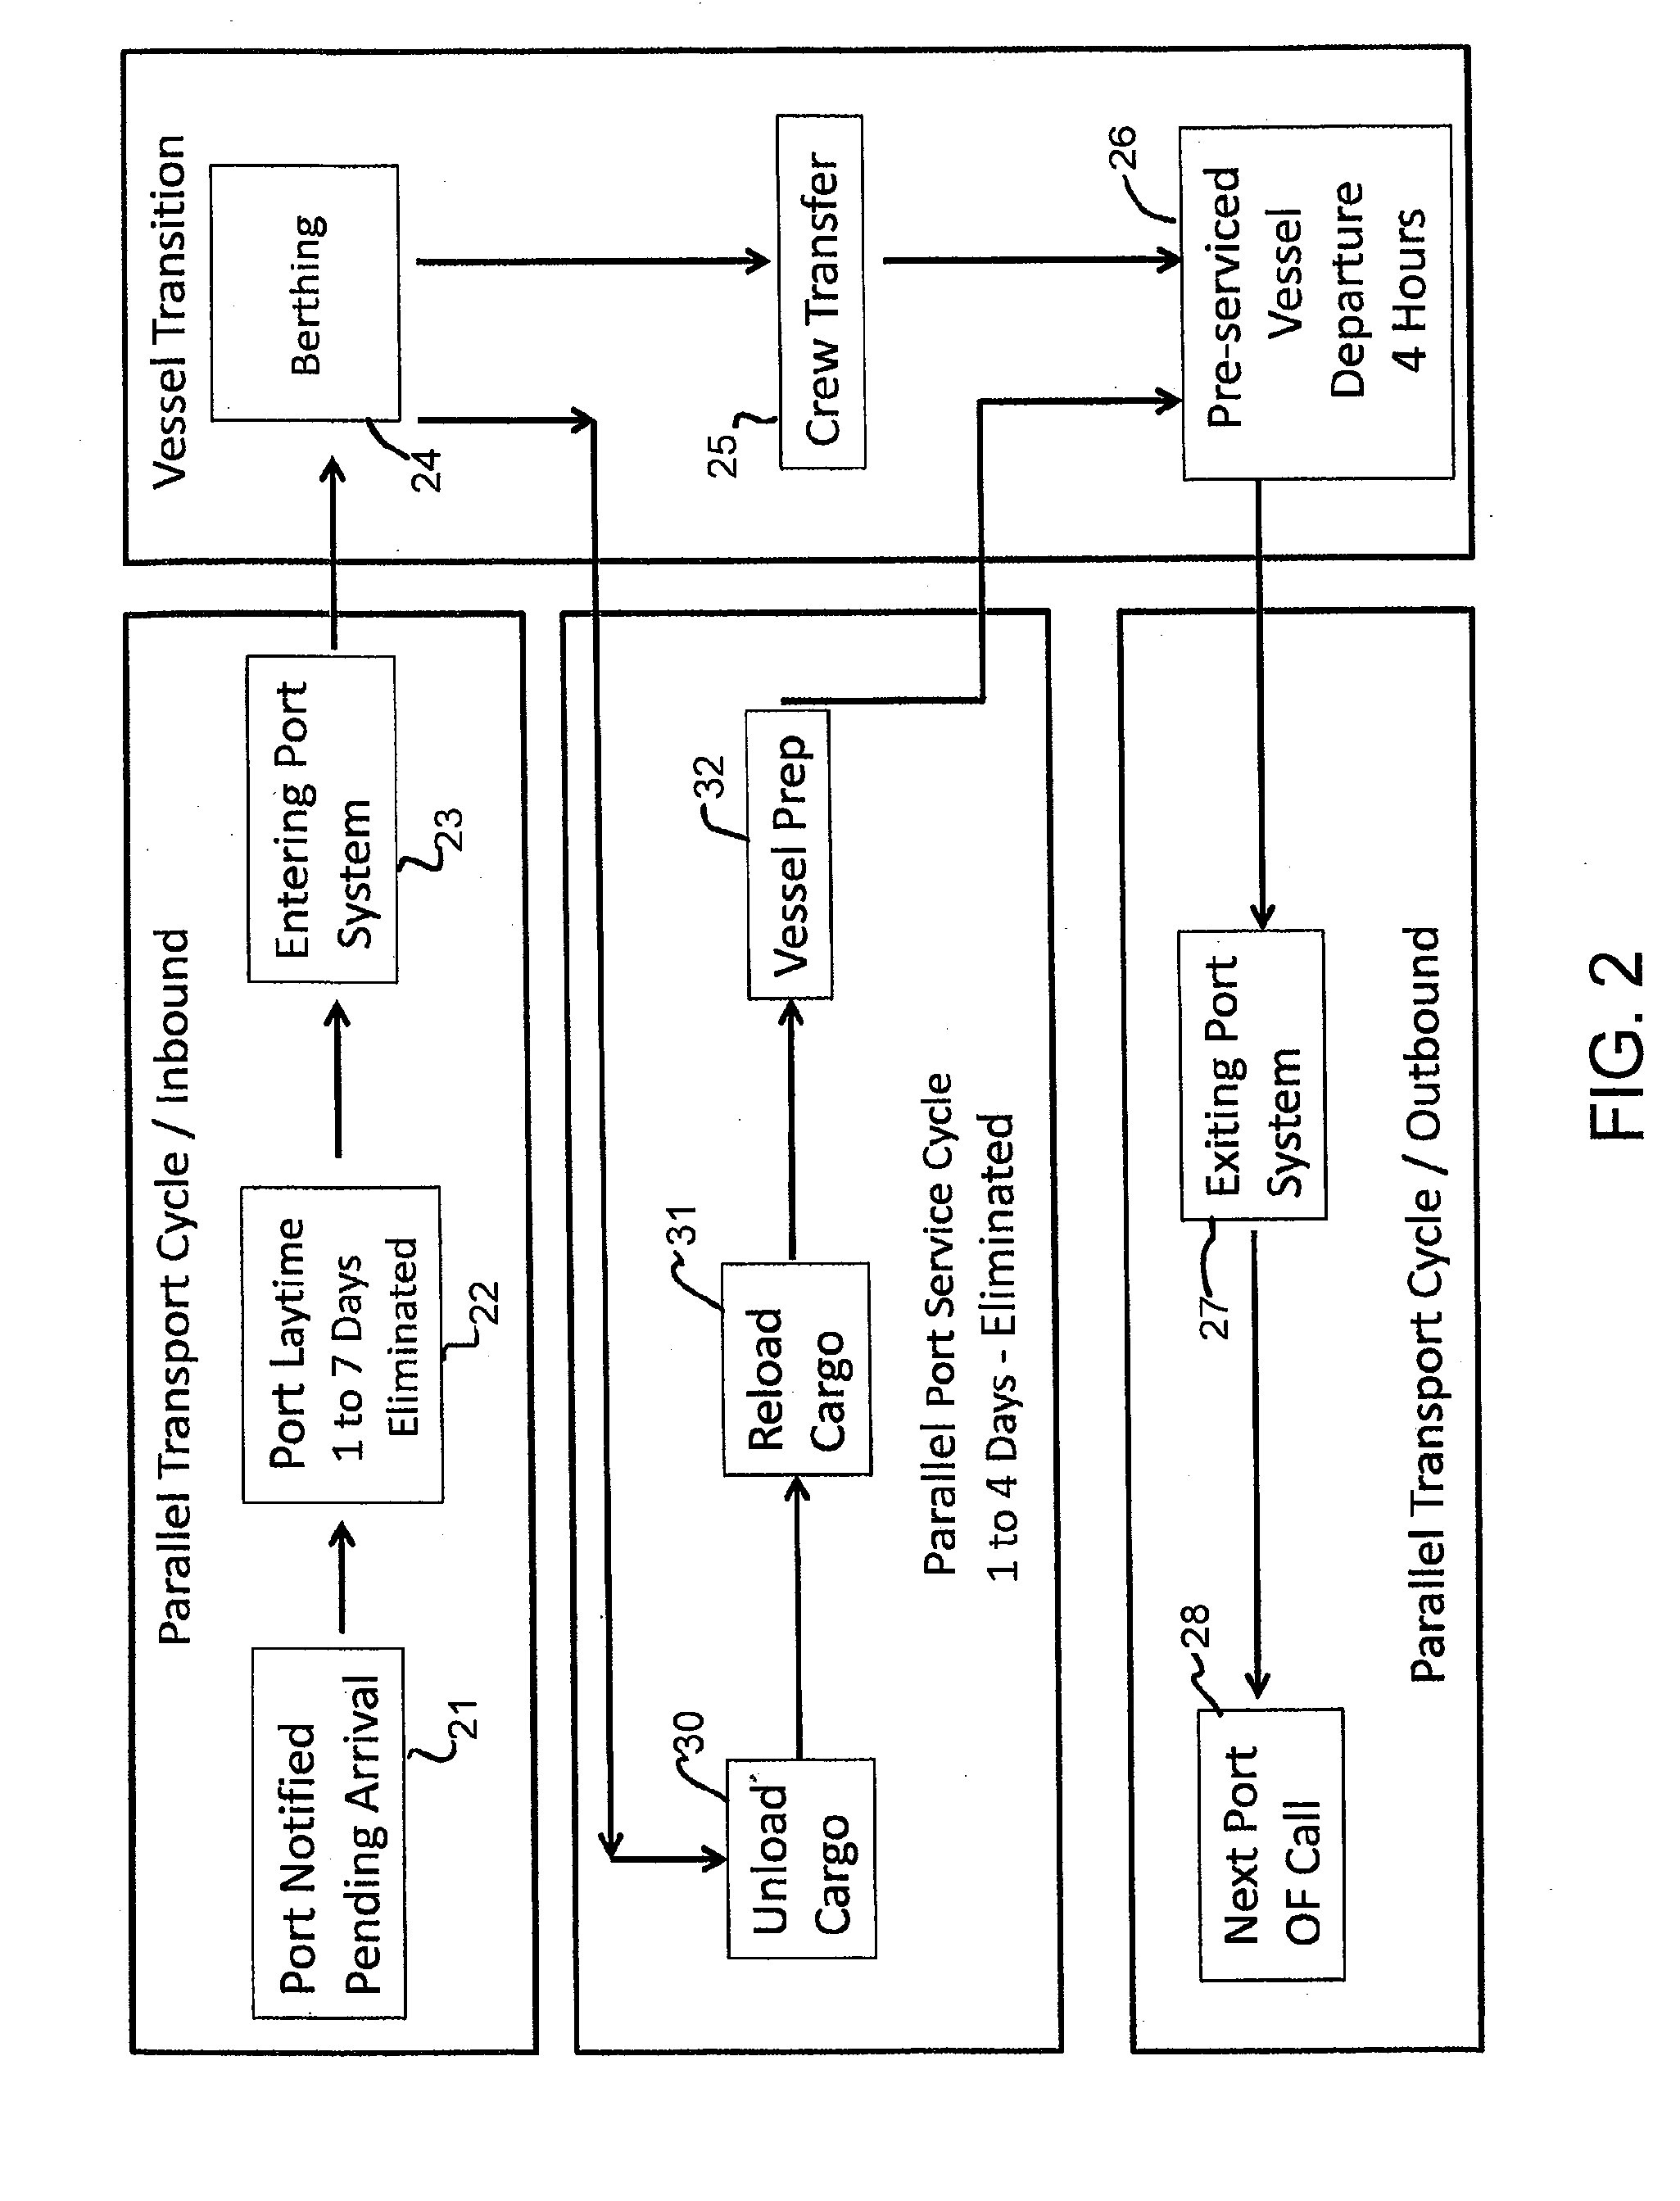 System and method of shipping scheduling involving parallel port operations using prepositioned vessels